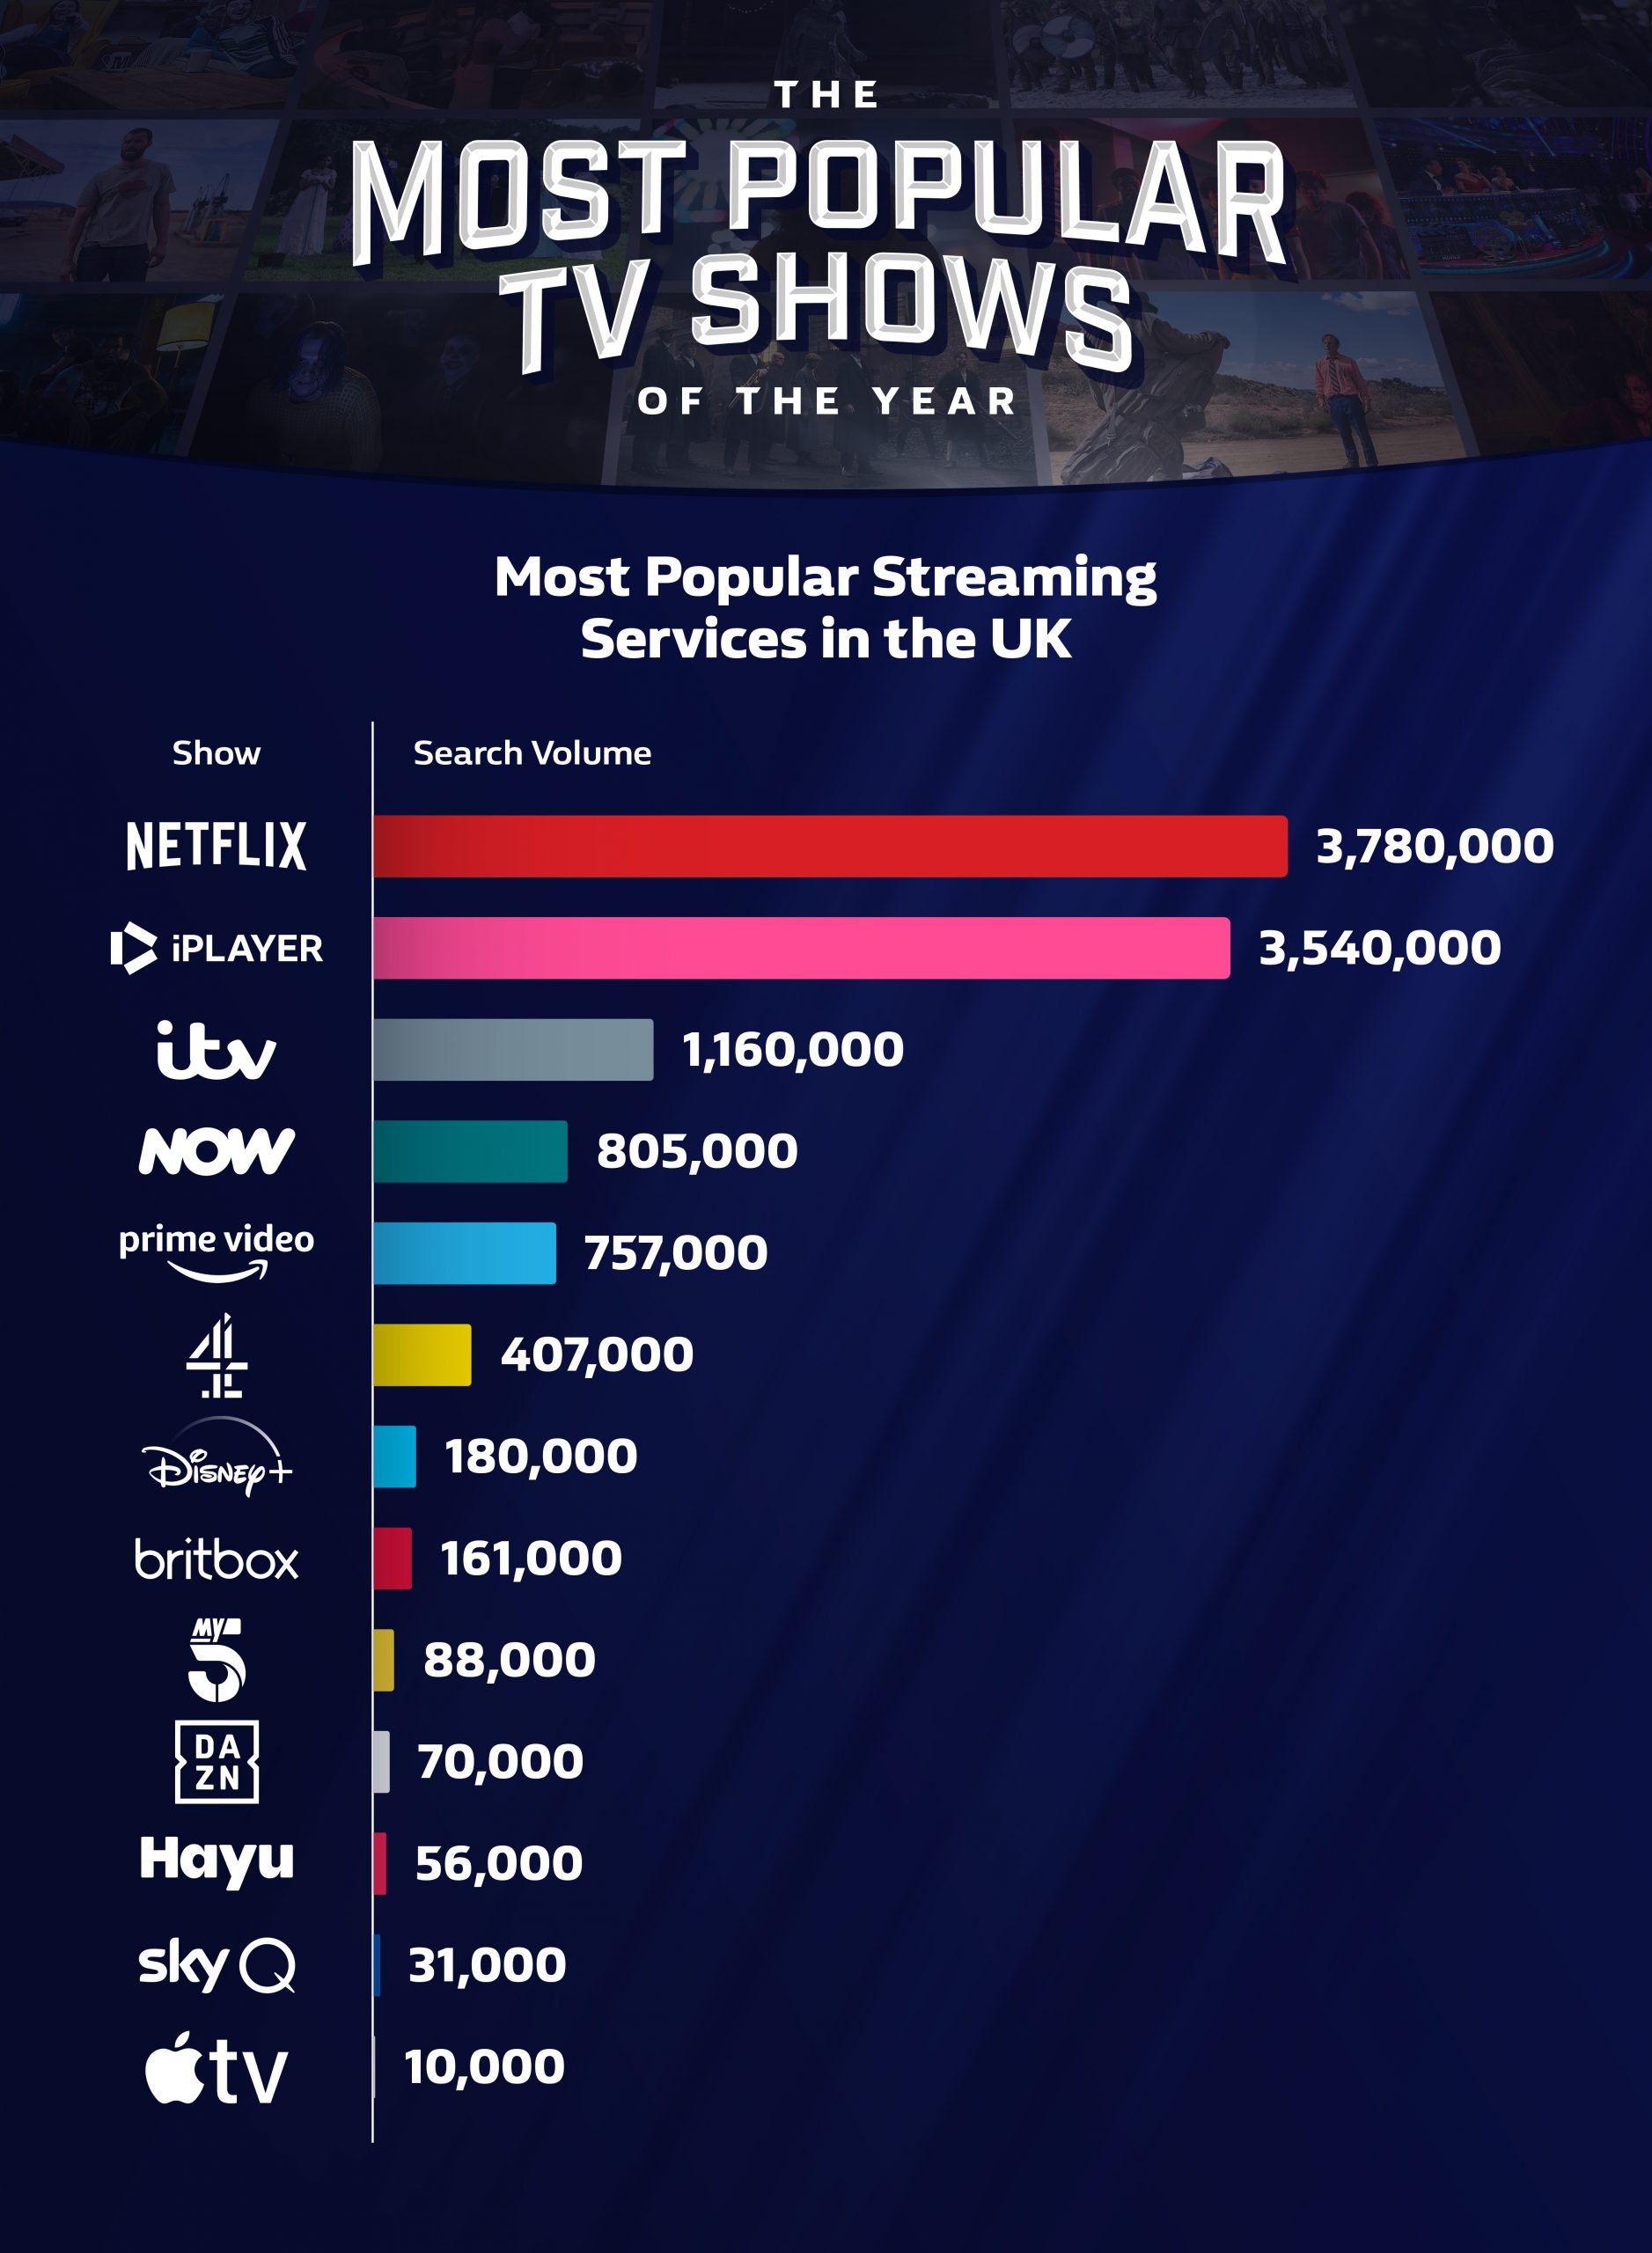 Most popular streaming services in the UK